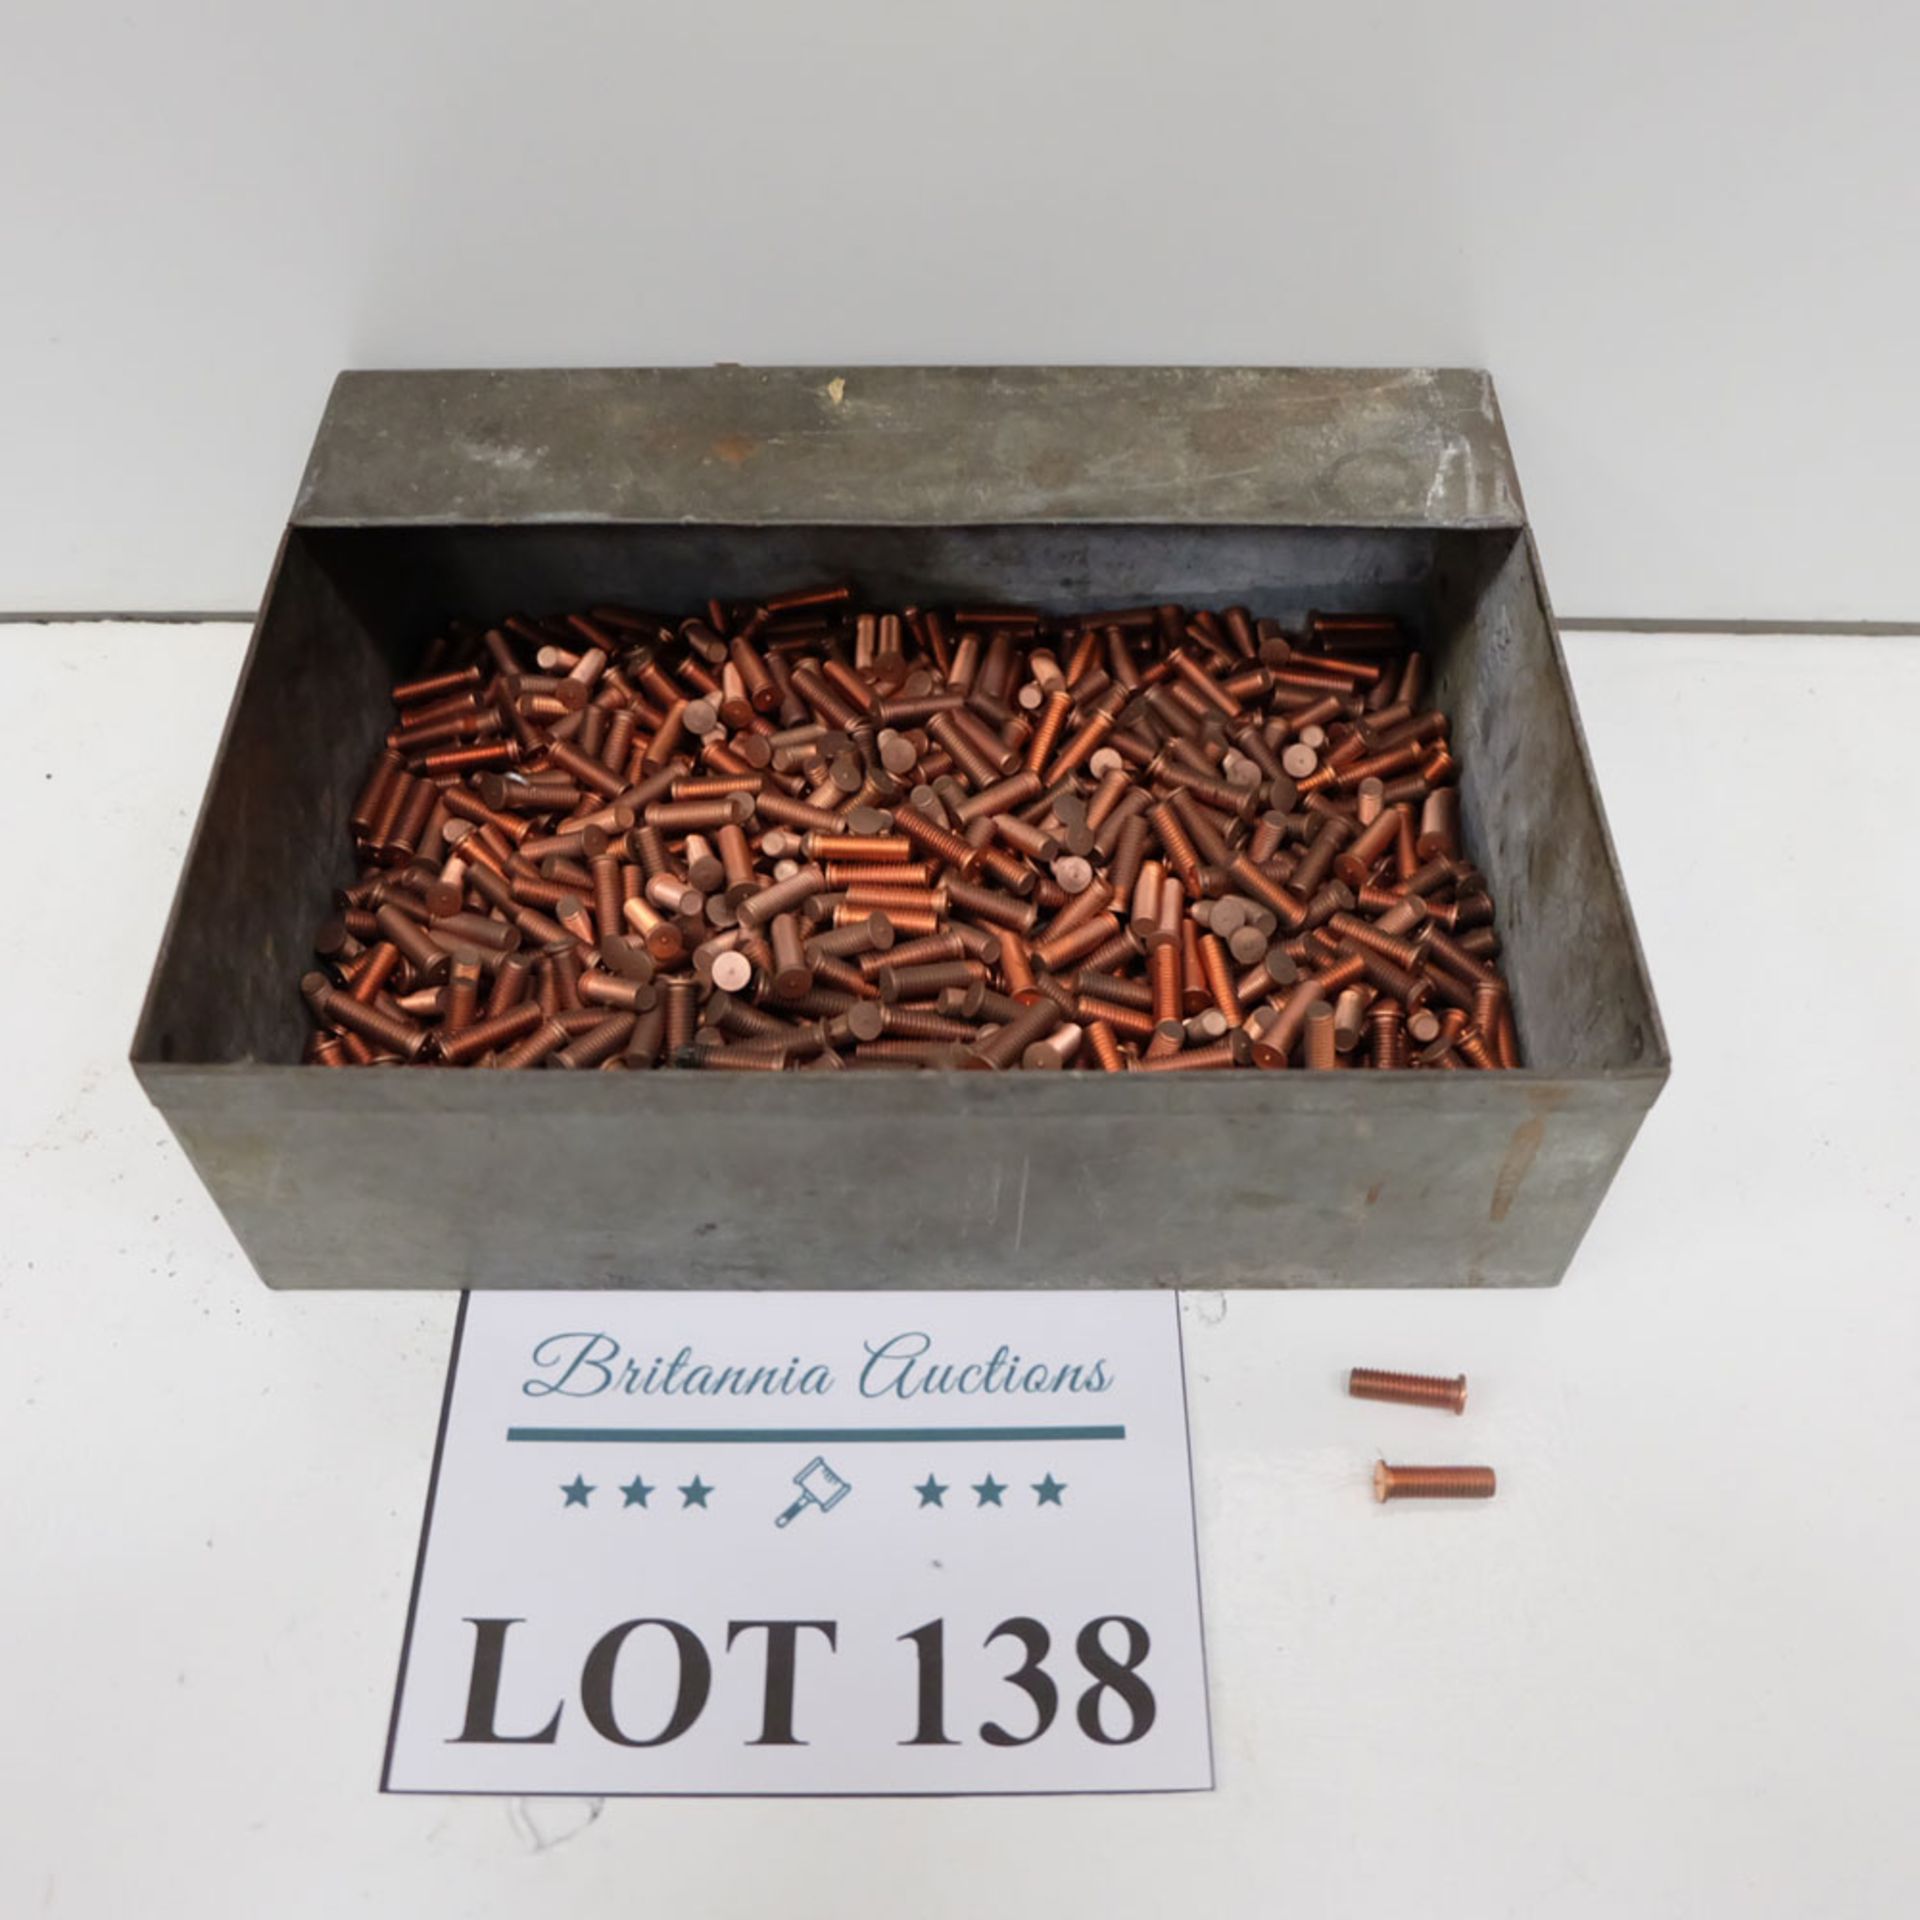 Quantity of Welding Studs as Lotted. Labelled M6 x 20 CD Type Stud.